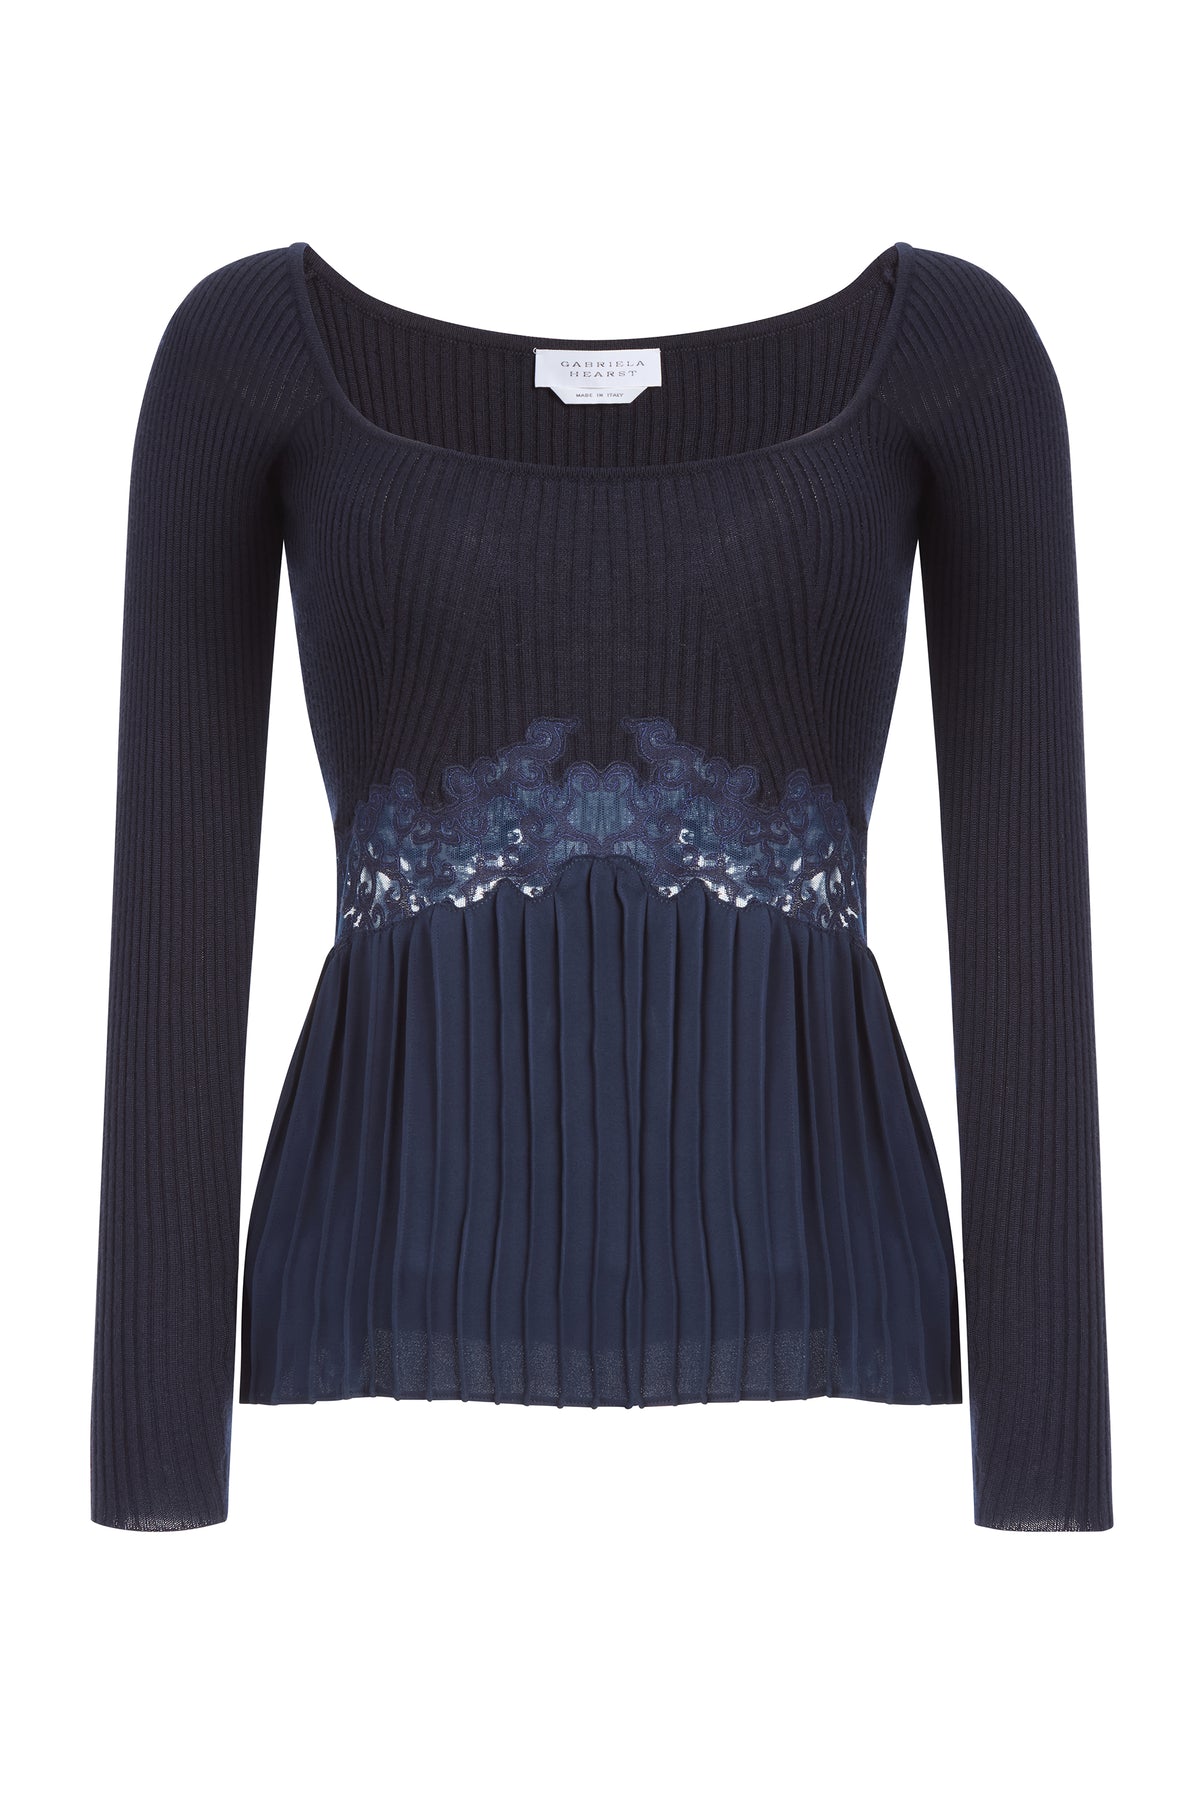 Fini Lace Top in Navy Silk Crepe